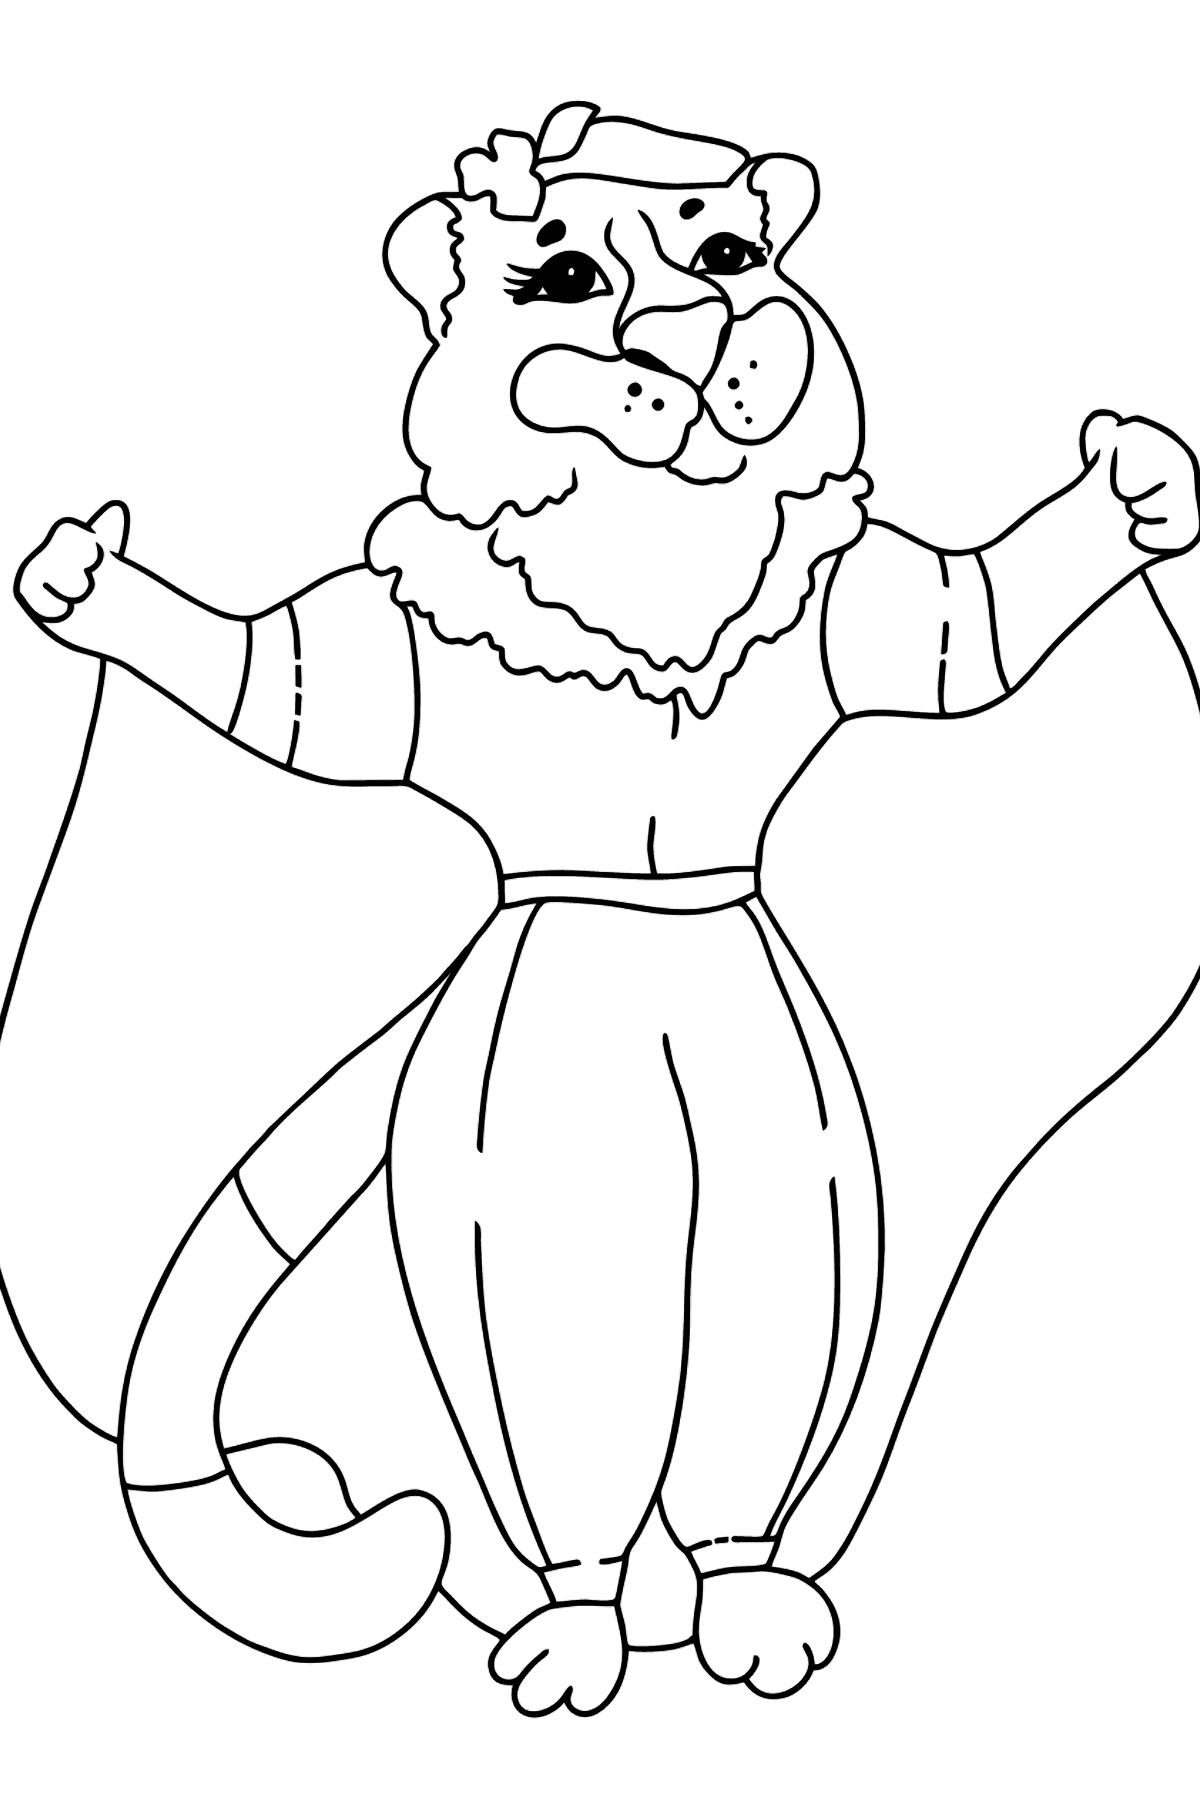 Coloring Page - A Tigress is Jumping - Coloring Pages for Kids